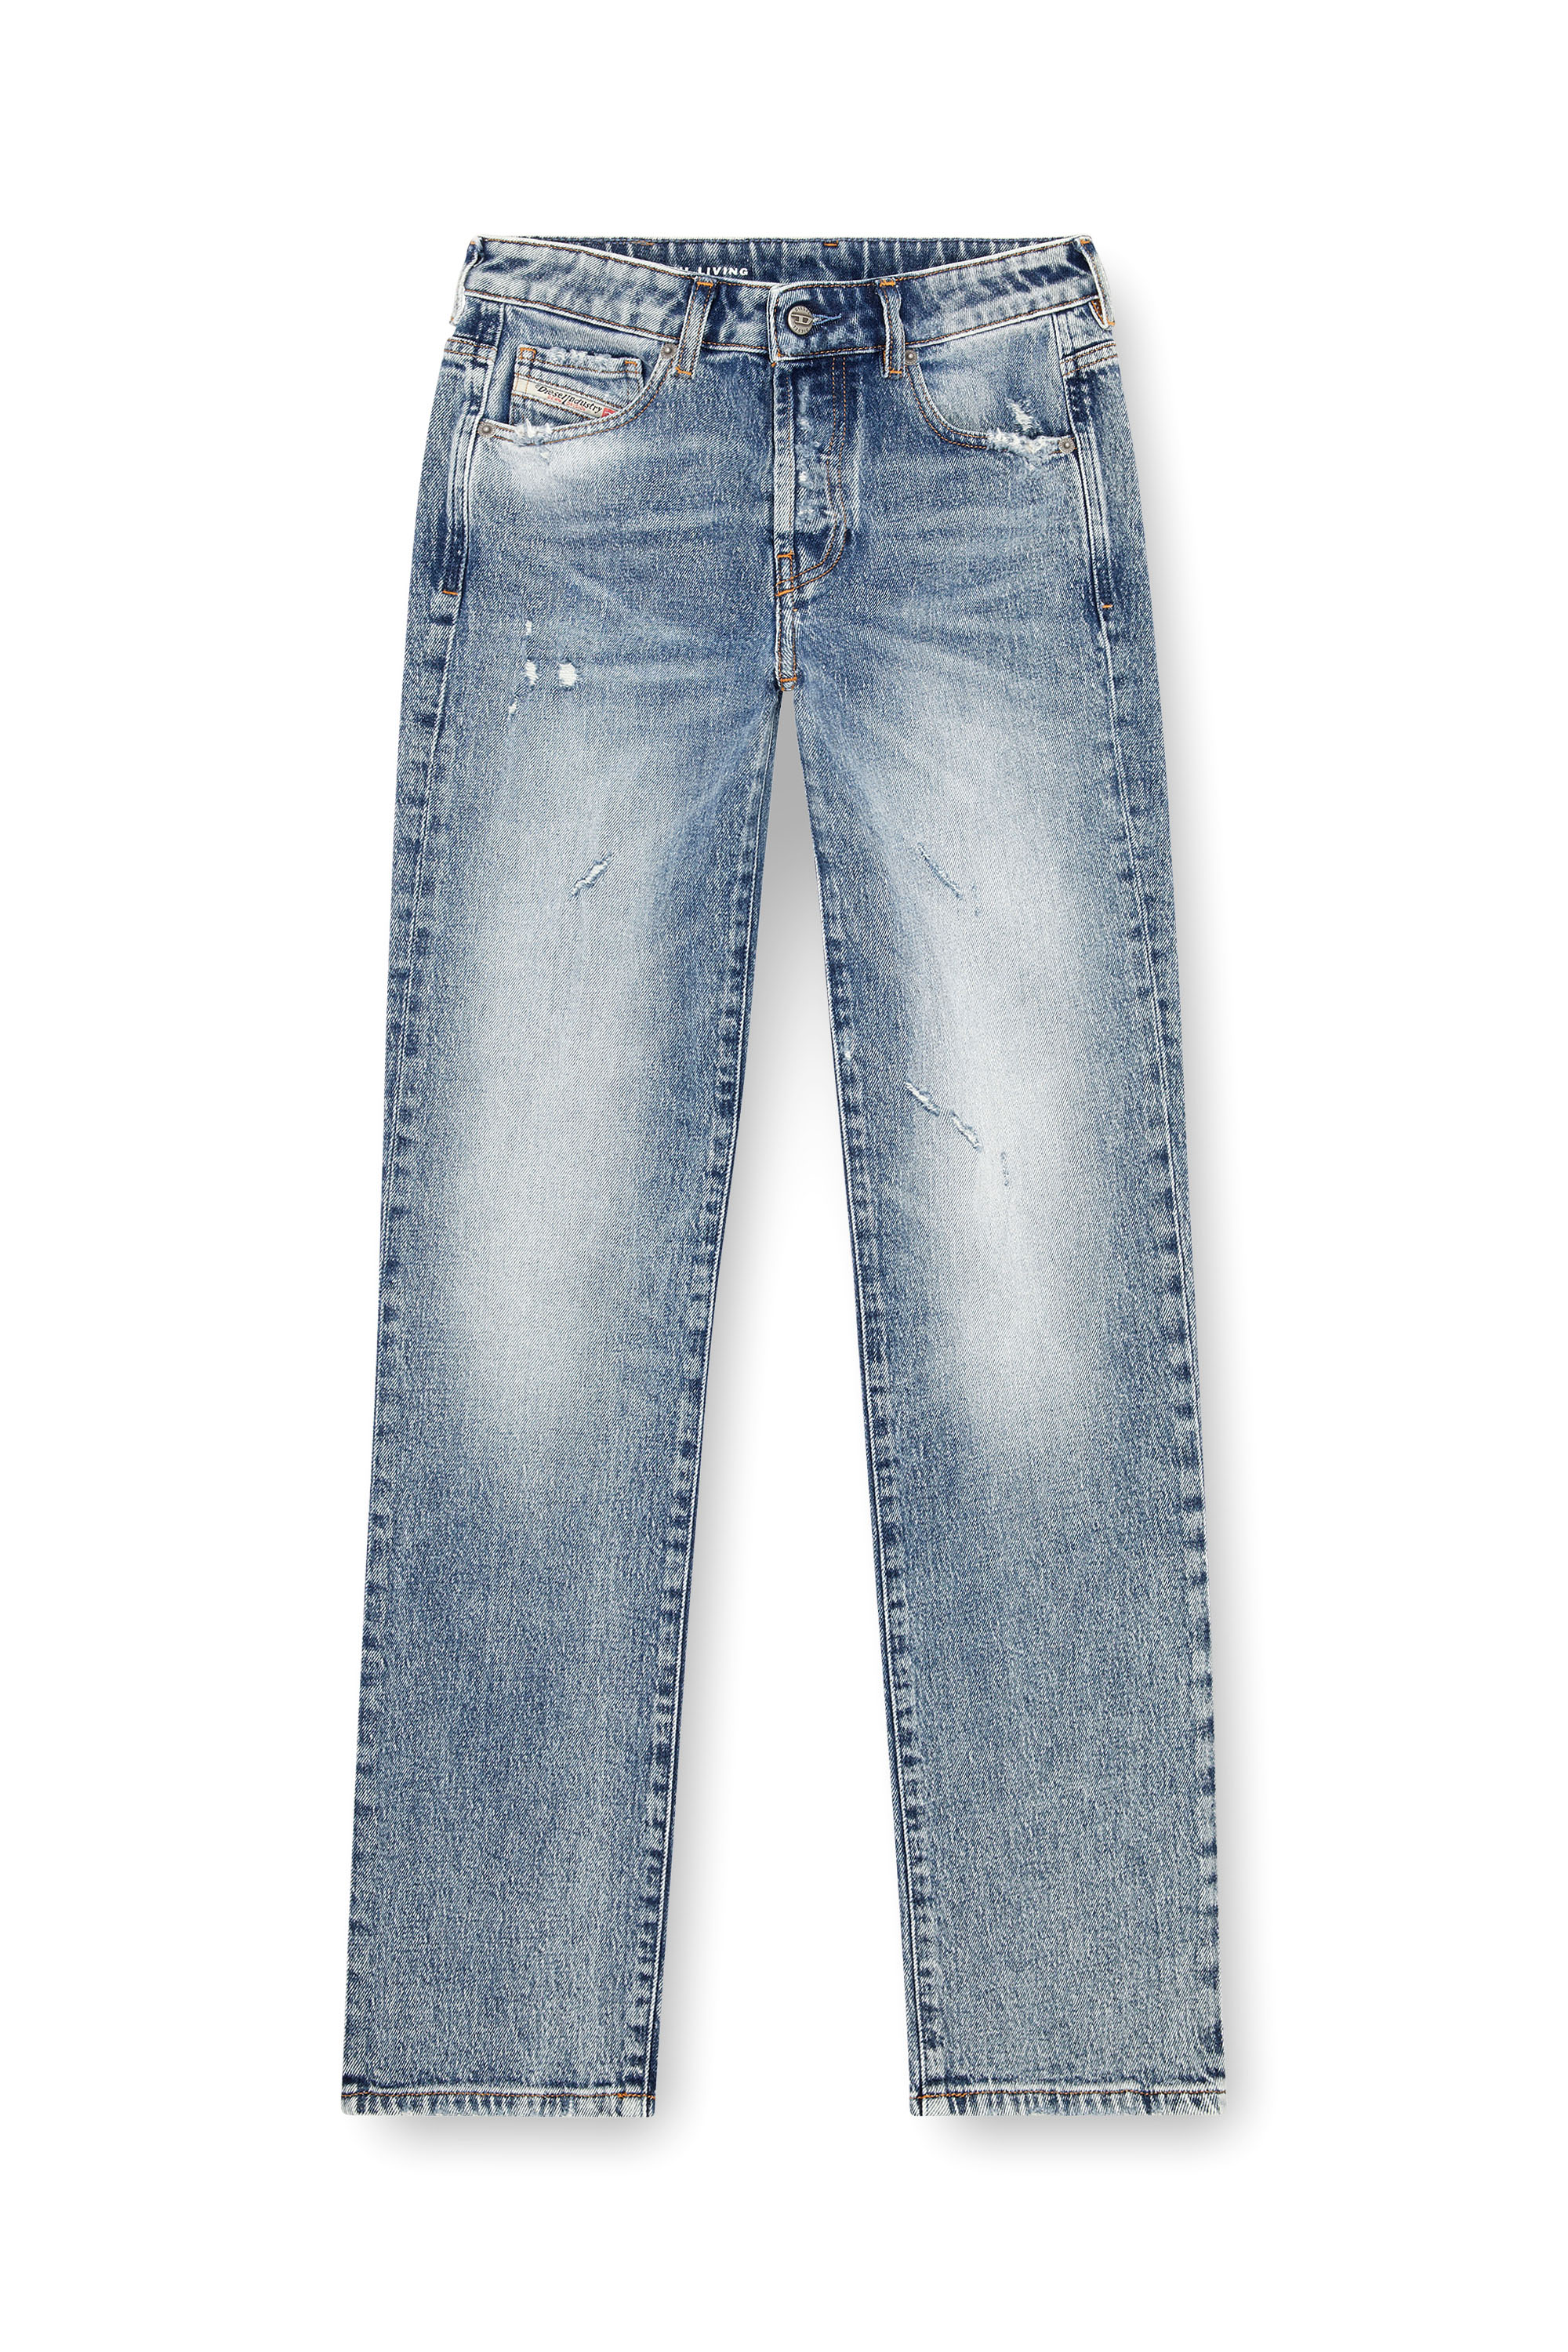 Diesel - Straight Jeans 1989 D-Mine 09J57, Mujer Straight Jeans - 1989 D-Mine in Azul marino - Image 3